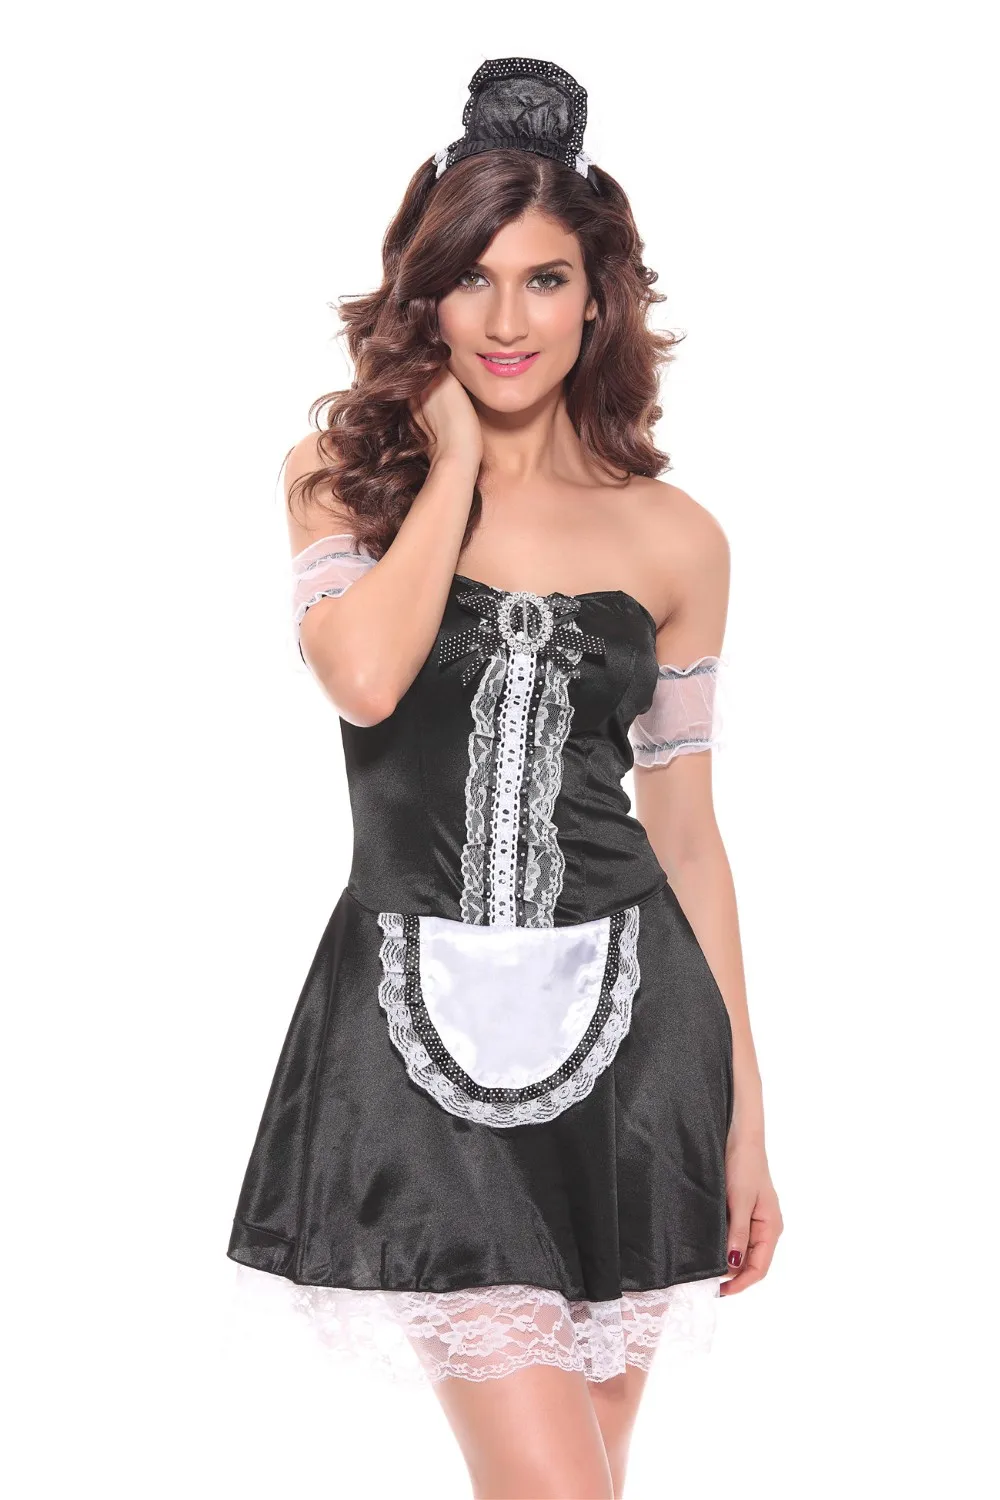 Sexy Girls Black Sexy French Maid Of Mini Lace Dresses Adult Shop French Maid Uniform Dress